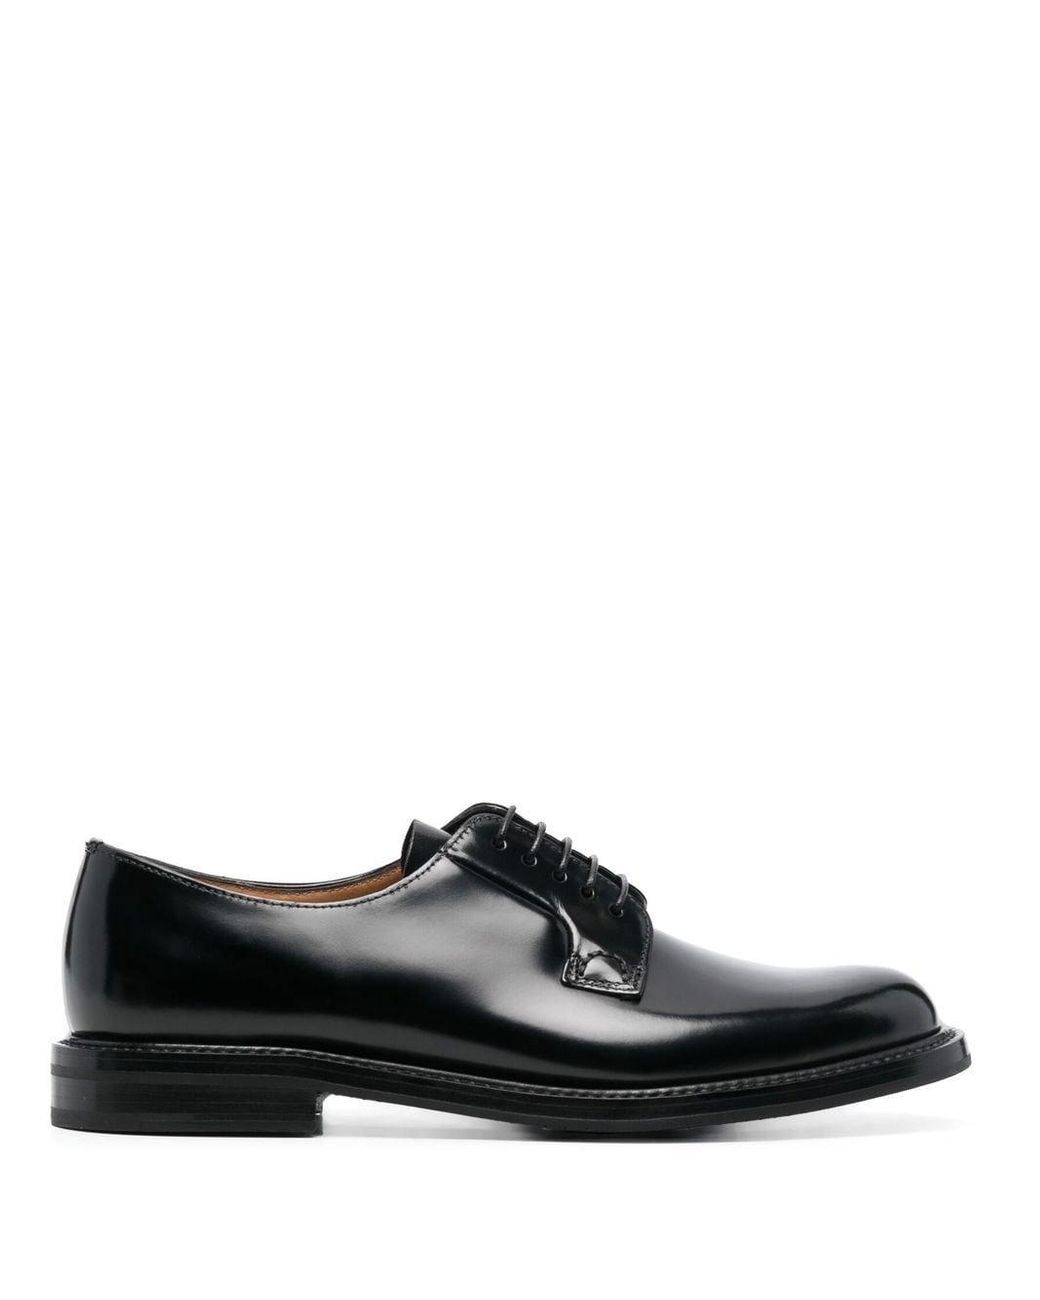 Church's Shannon Leather Oxford Shoes in Black | Lyst Canada